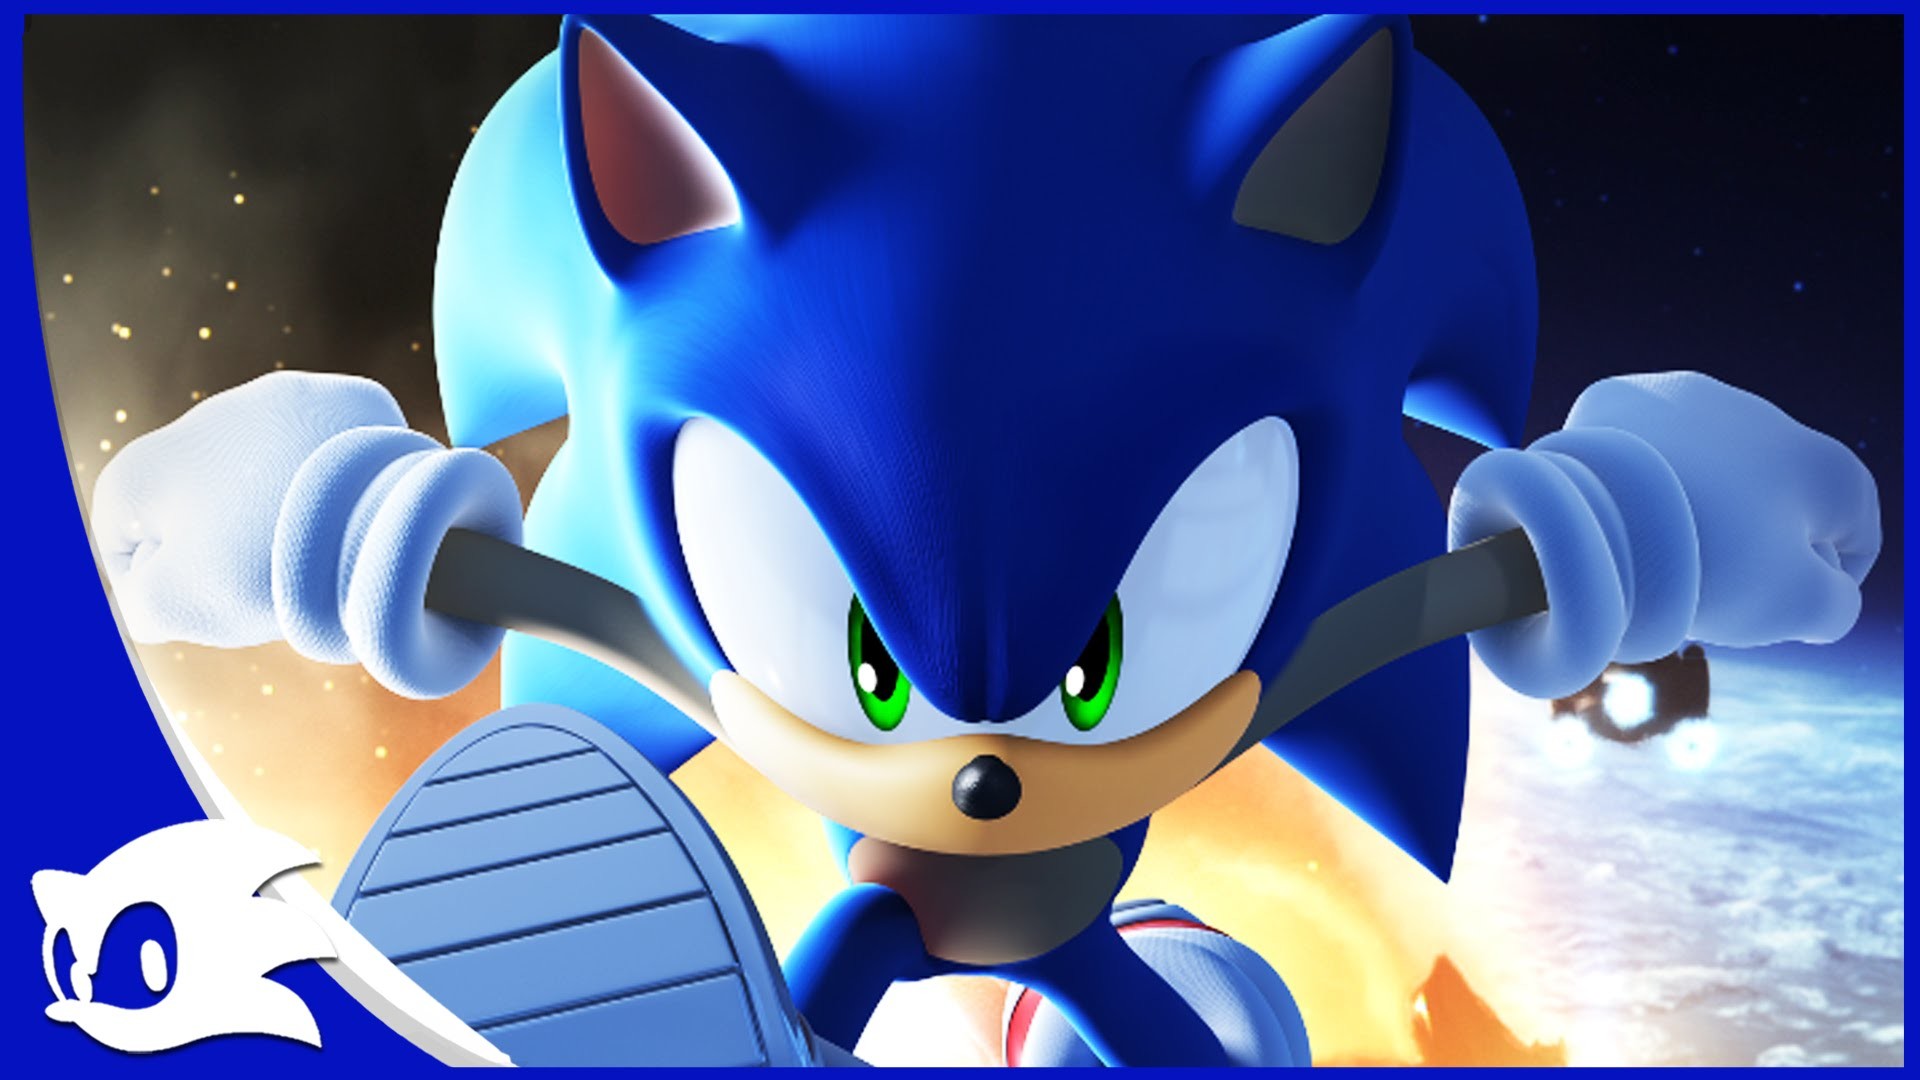 sonic wallpaper android,sonic the hedgehog,cartoon,animated cartoon,fictional character,animation